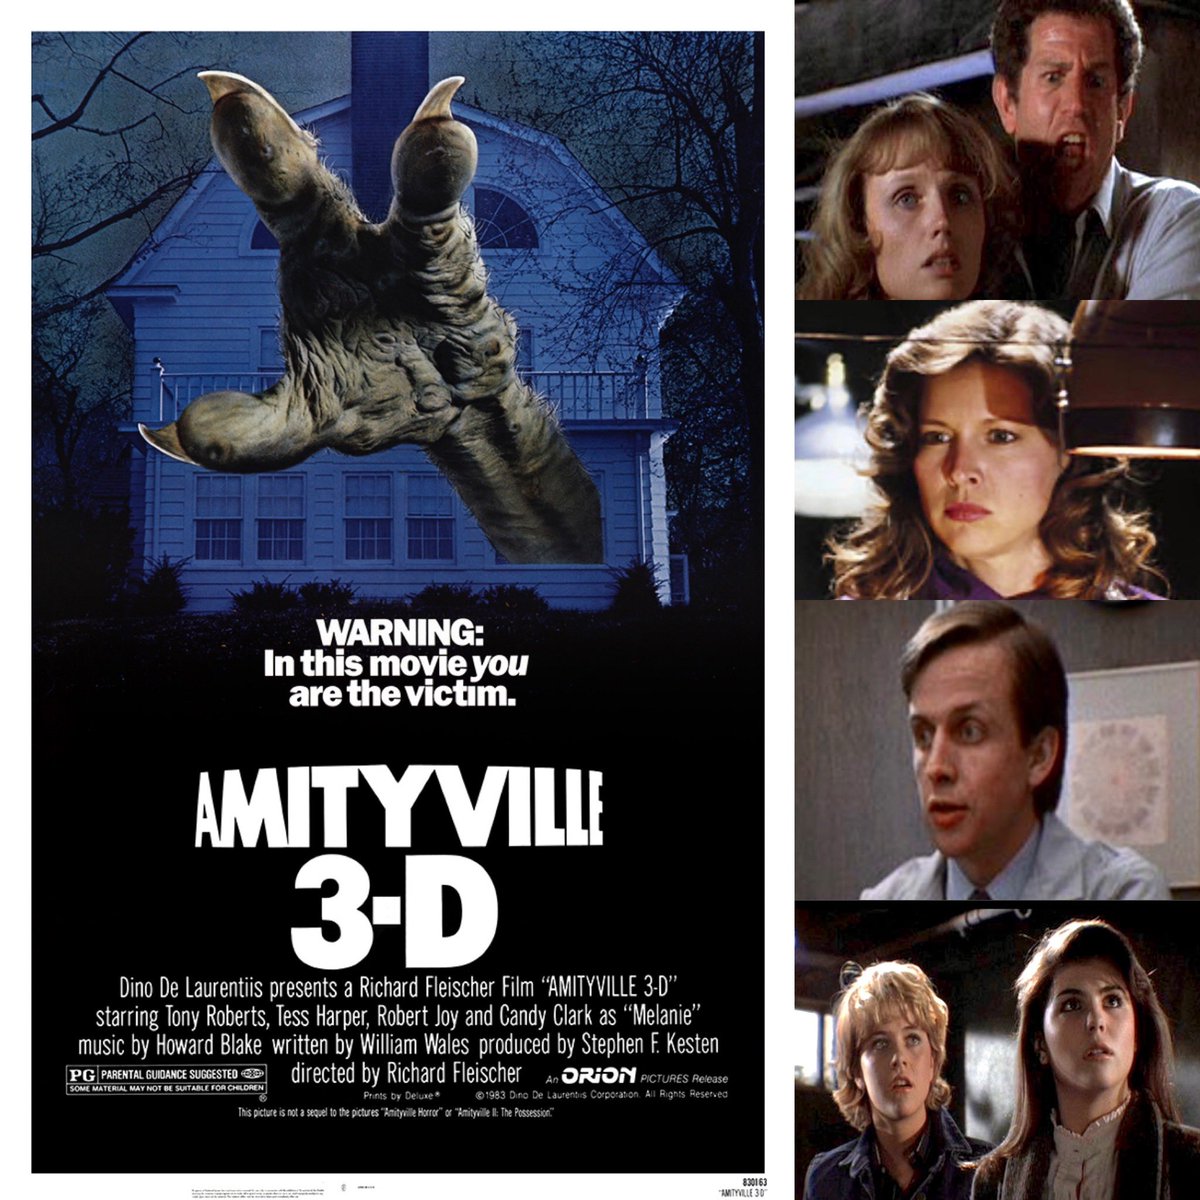 #NowWatching for the first time the 1983 horror movie “Amityville 3-D” with Tony Roberts, Tess Harper, Candy Clark and Robert Joy. Plus Meg Ryan and Lori Loughlin in small roles. #Movie #Movies #MoviePoster #HorrorMovies #HorrorCommunity https://t.co/WzBIQ9fWI3